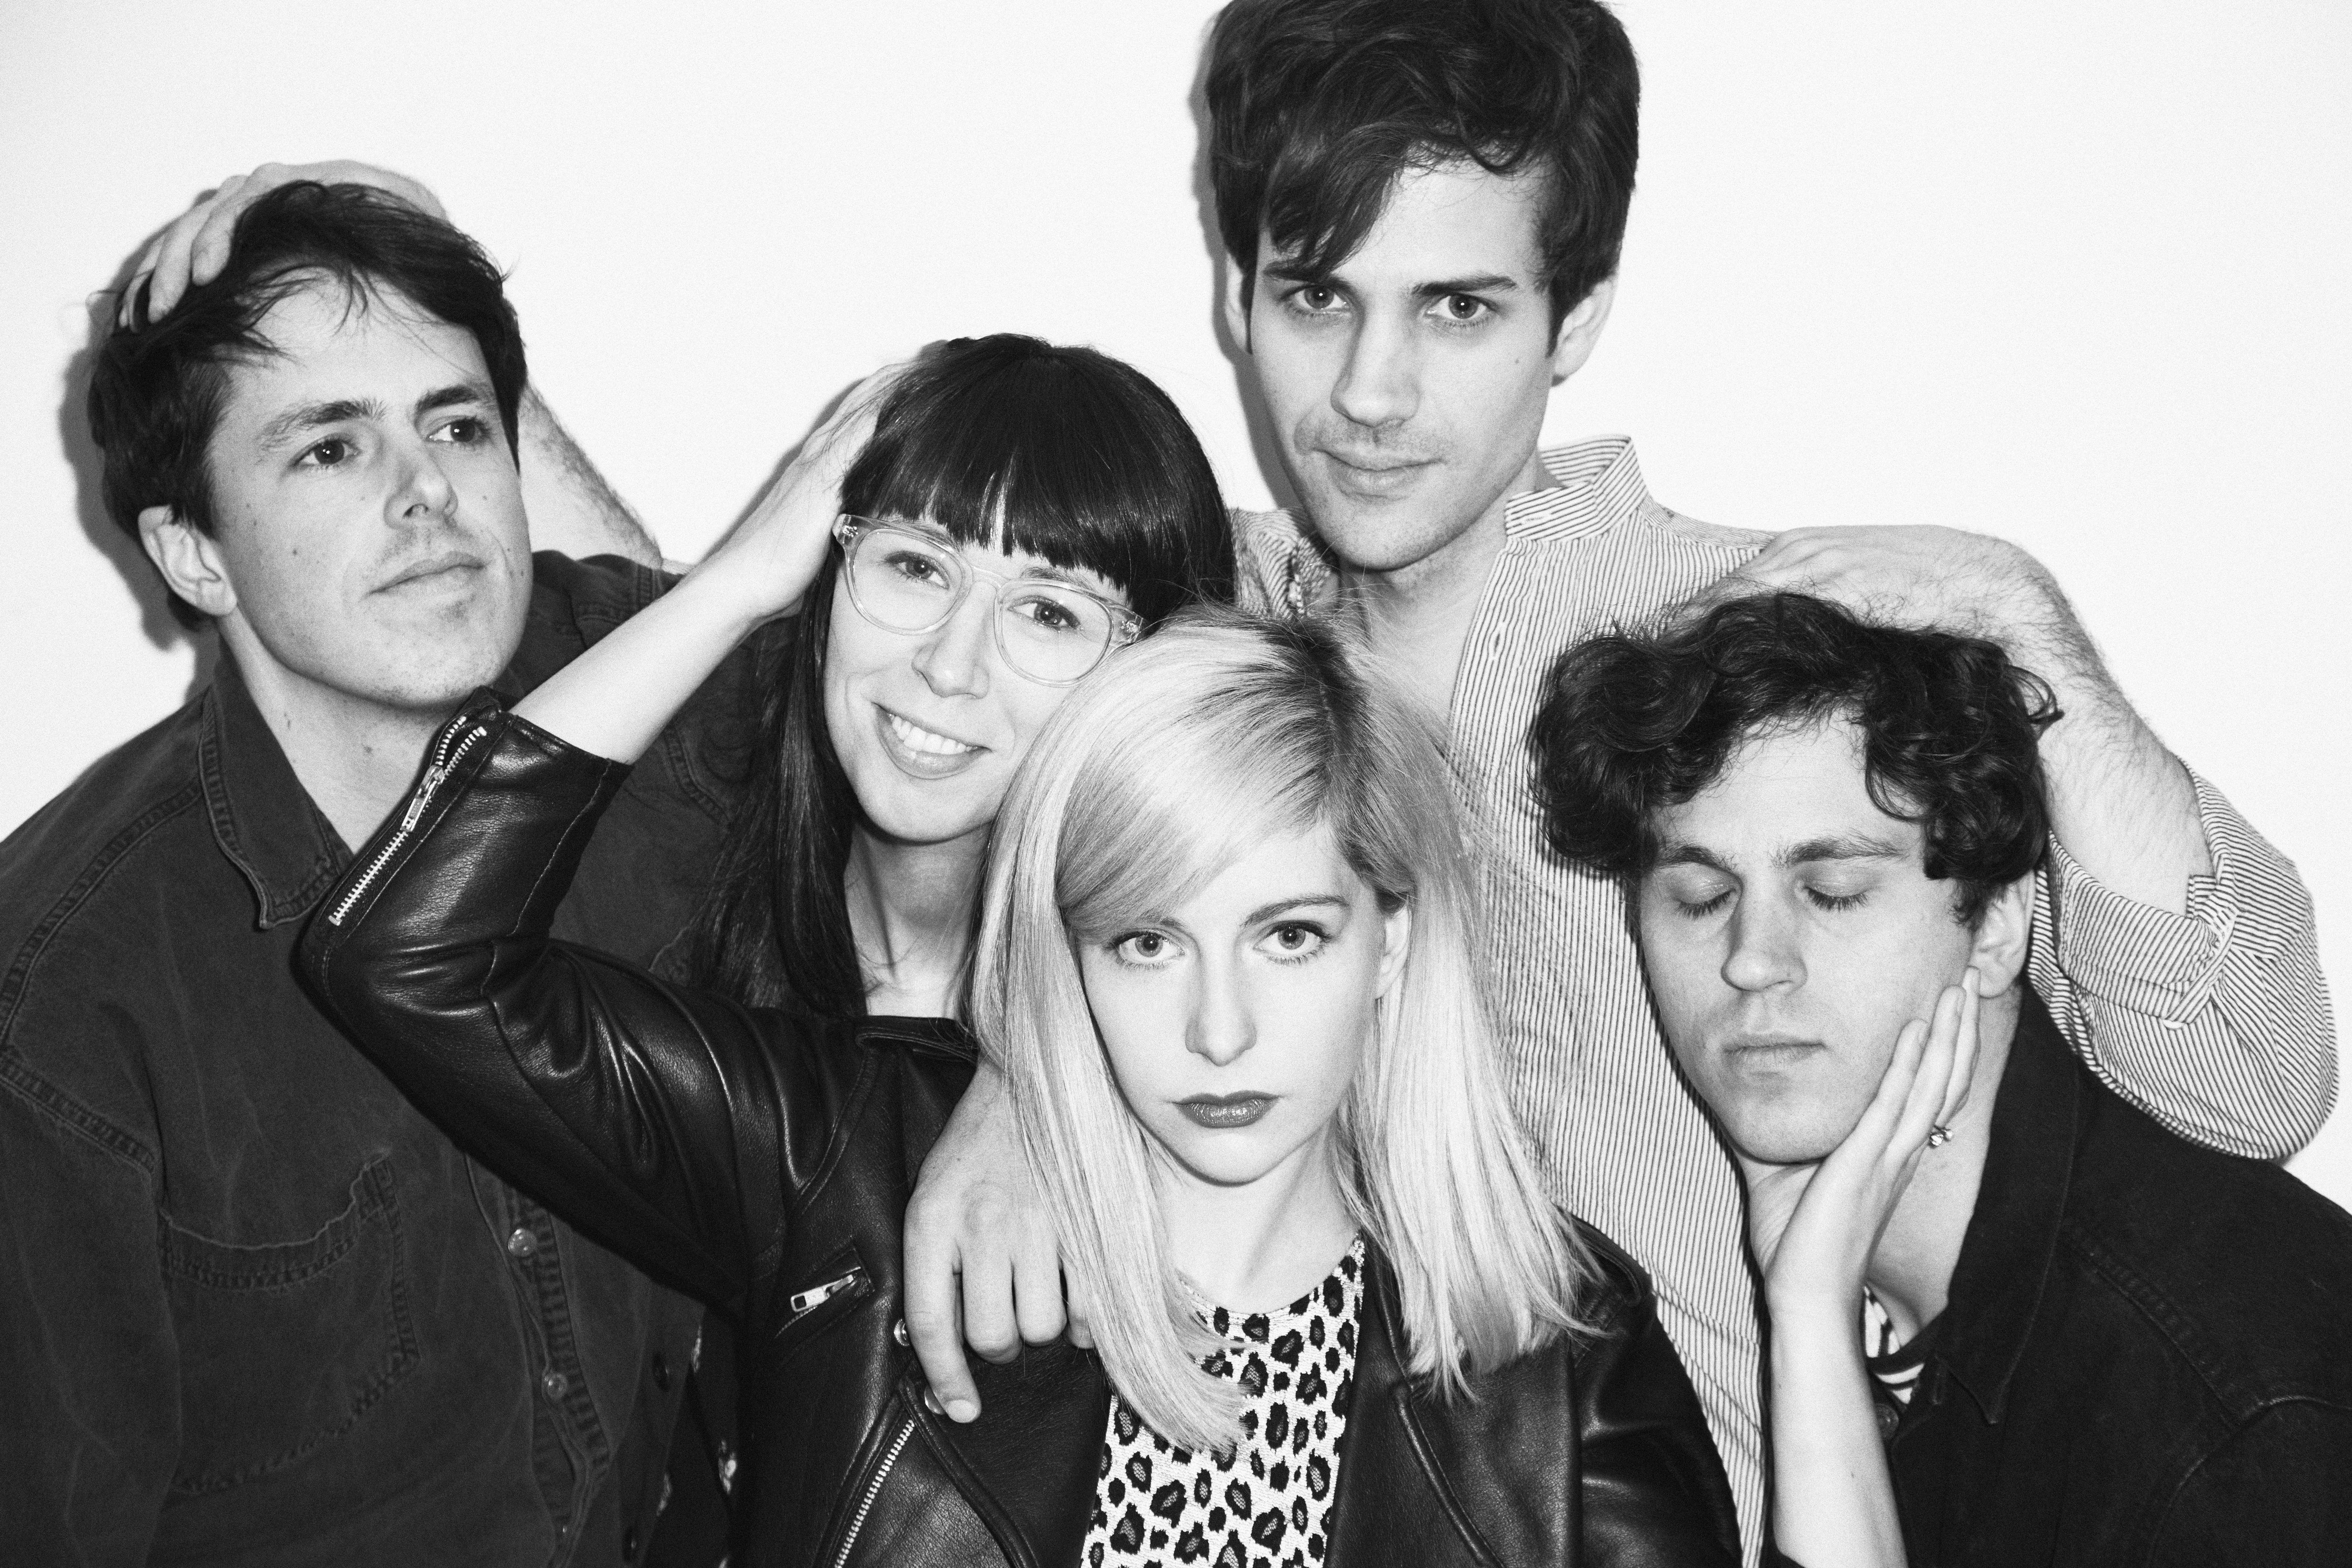 ALVVAYS have announce new fall dates with White Reaper and Fucked Up. The tour starts on October 3rd